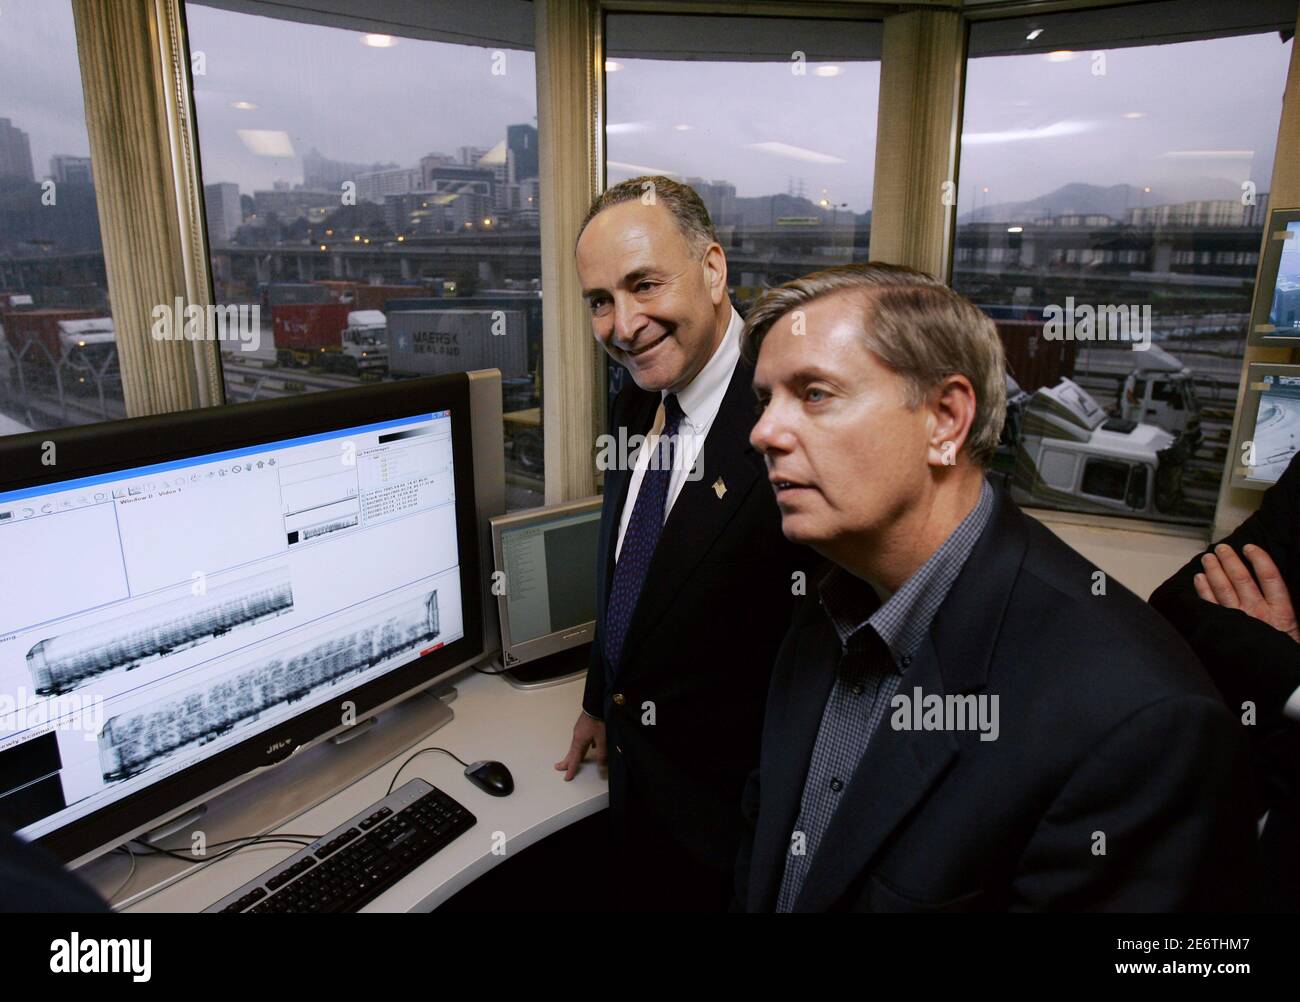 U.S. Senators Charles Schumer (L) of New York and Lindsey Graham of South Carolina visit a control room for monitoring the containers scanner at a Hutchison International container port in Hong Kong March 25, 2006. In the aftermath of the Dubai ports dispute, the Bush administration is negotiating with Hong Kong-based Hutchison Whampoa Ltd on a contract involving nuclear detection devices at Freeport, Bahamas, that would monitor cargo passing through to the United States.  REUTERS/Kin Cheung/Pool Stock Photo